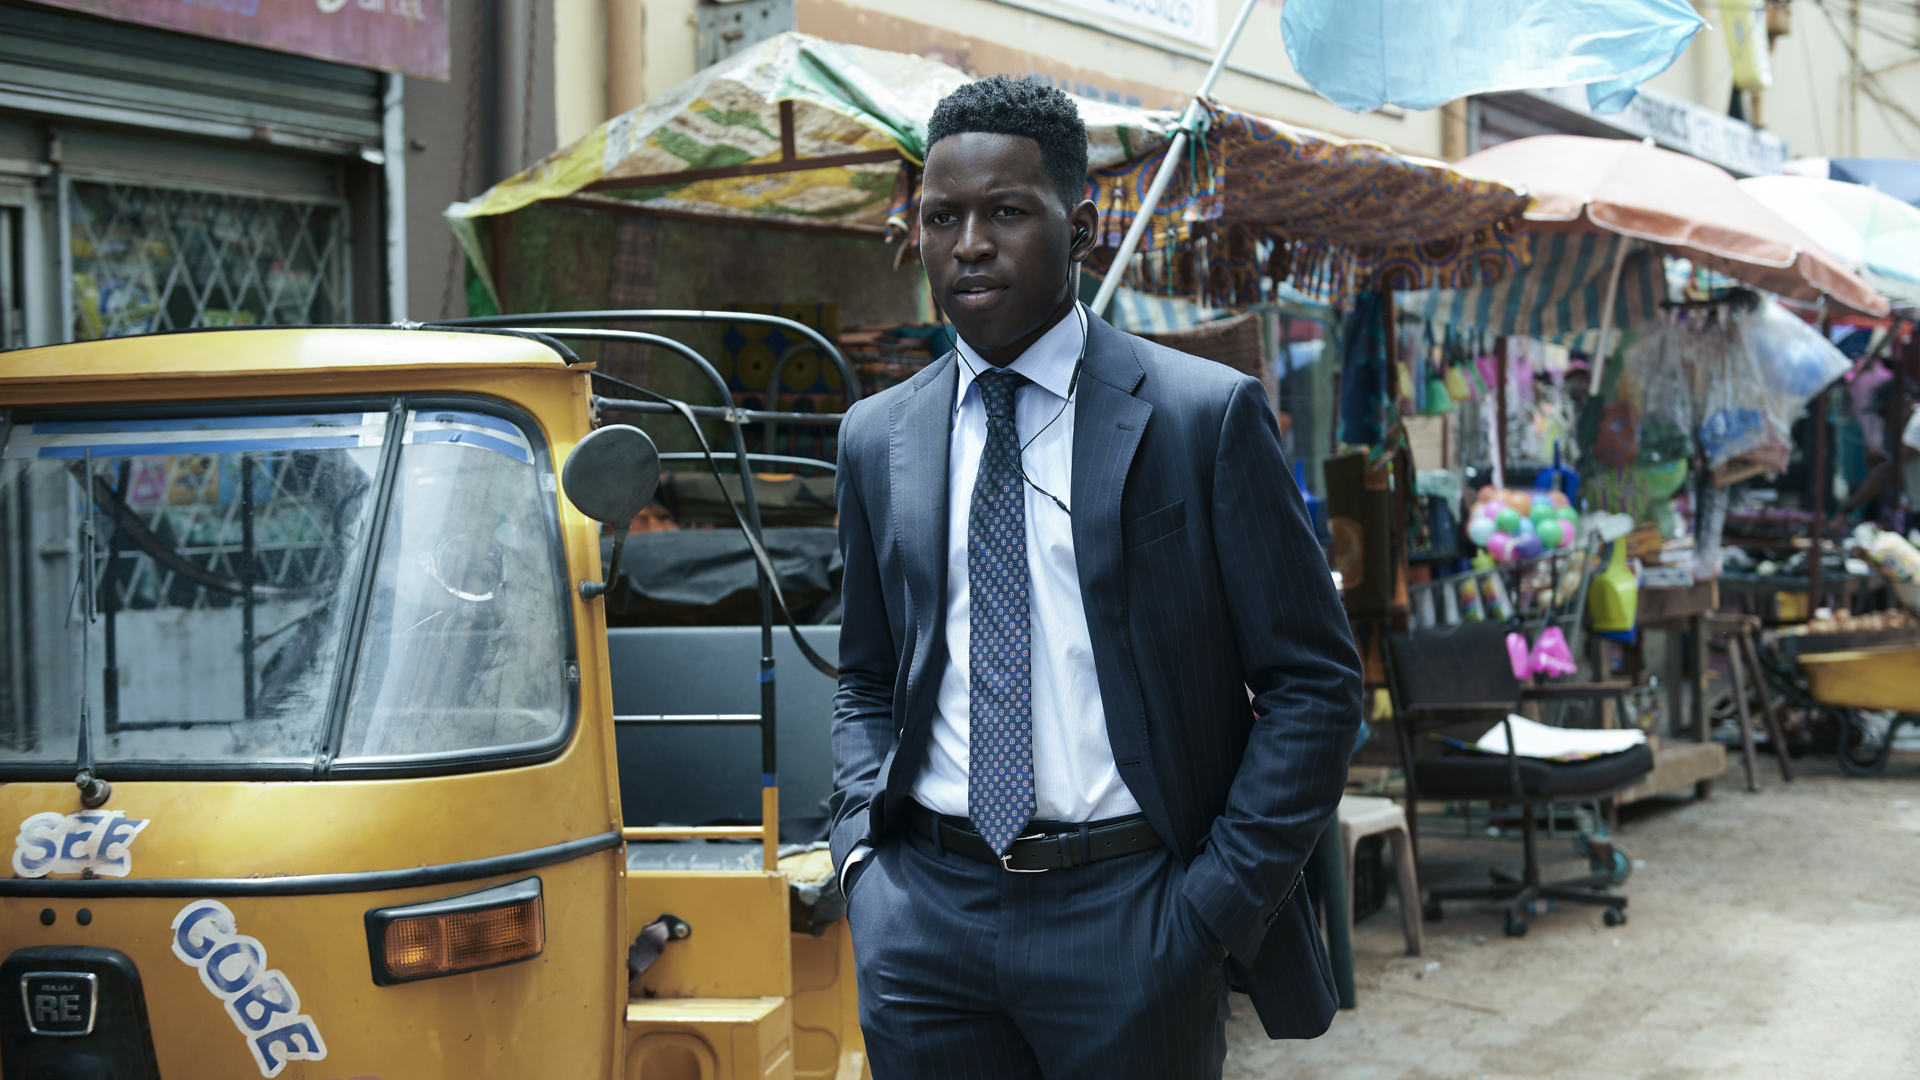 Tunde Ojo walks down a street with his hands in his pockets in Prime Video's The Power